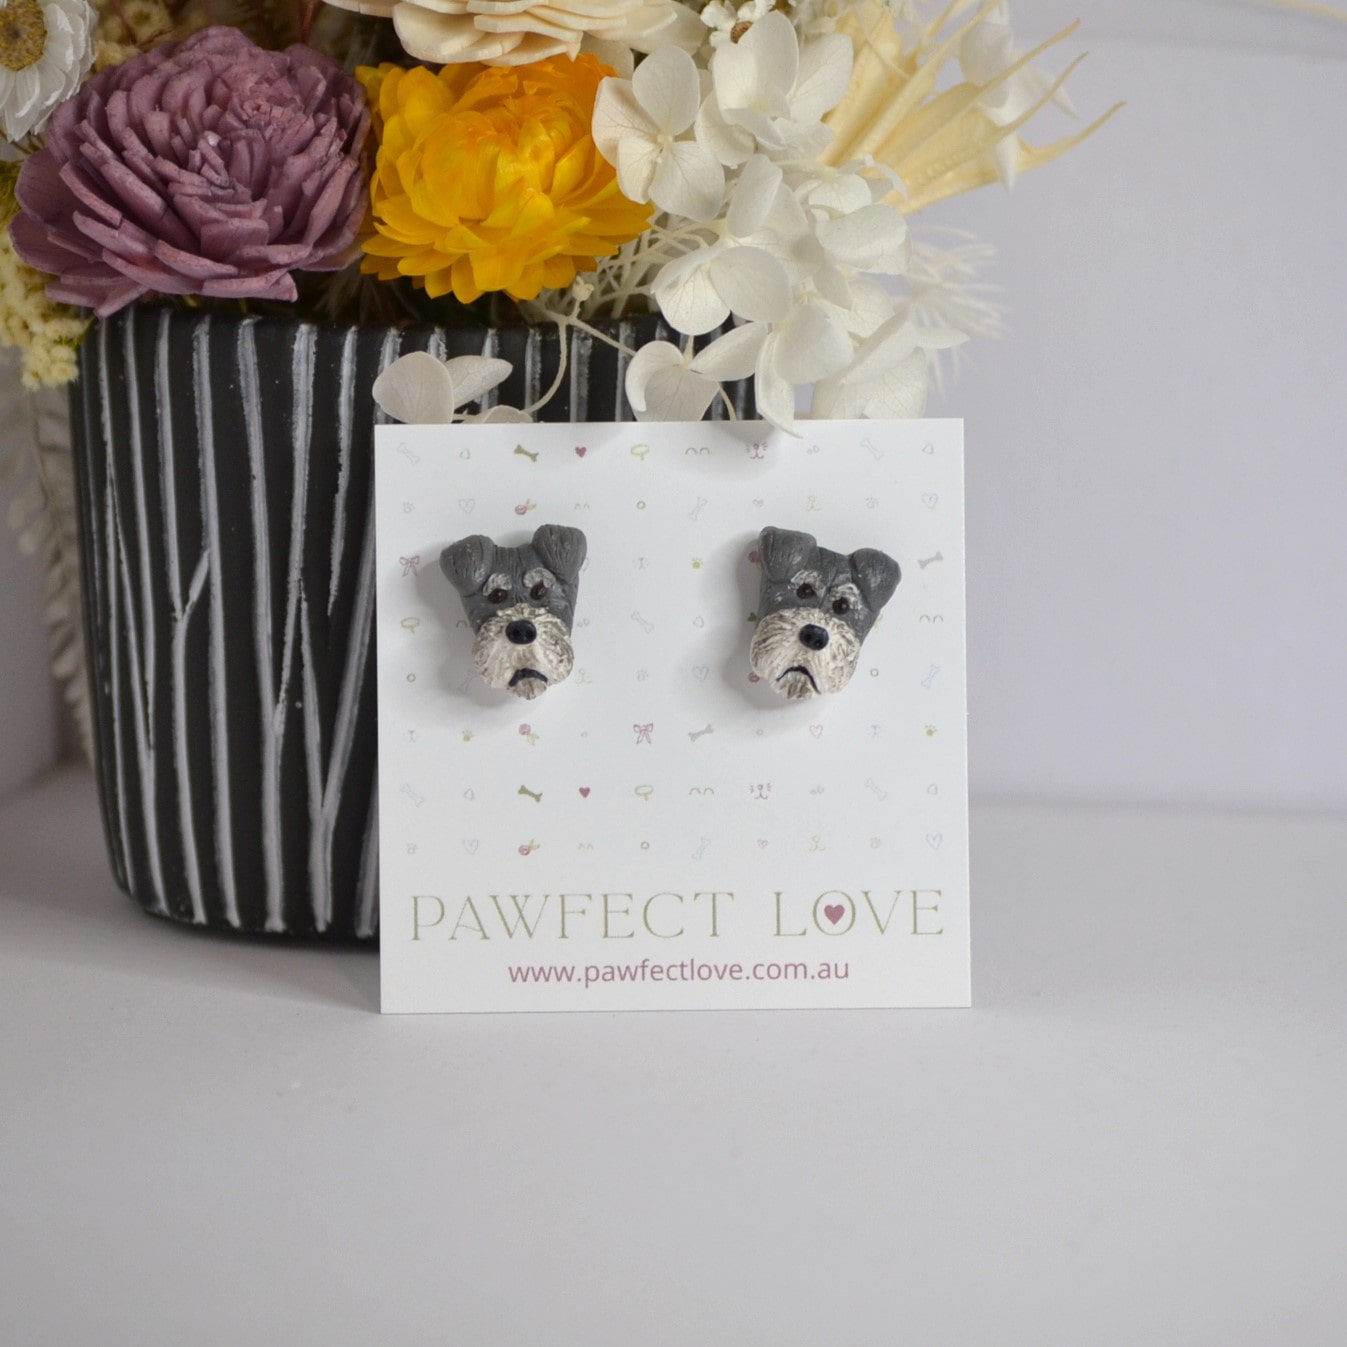 Handmade schnauzer stud earrings by Pawfect Love, positioned in front of dried flower arrangement